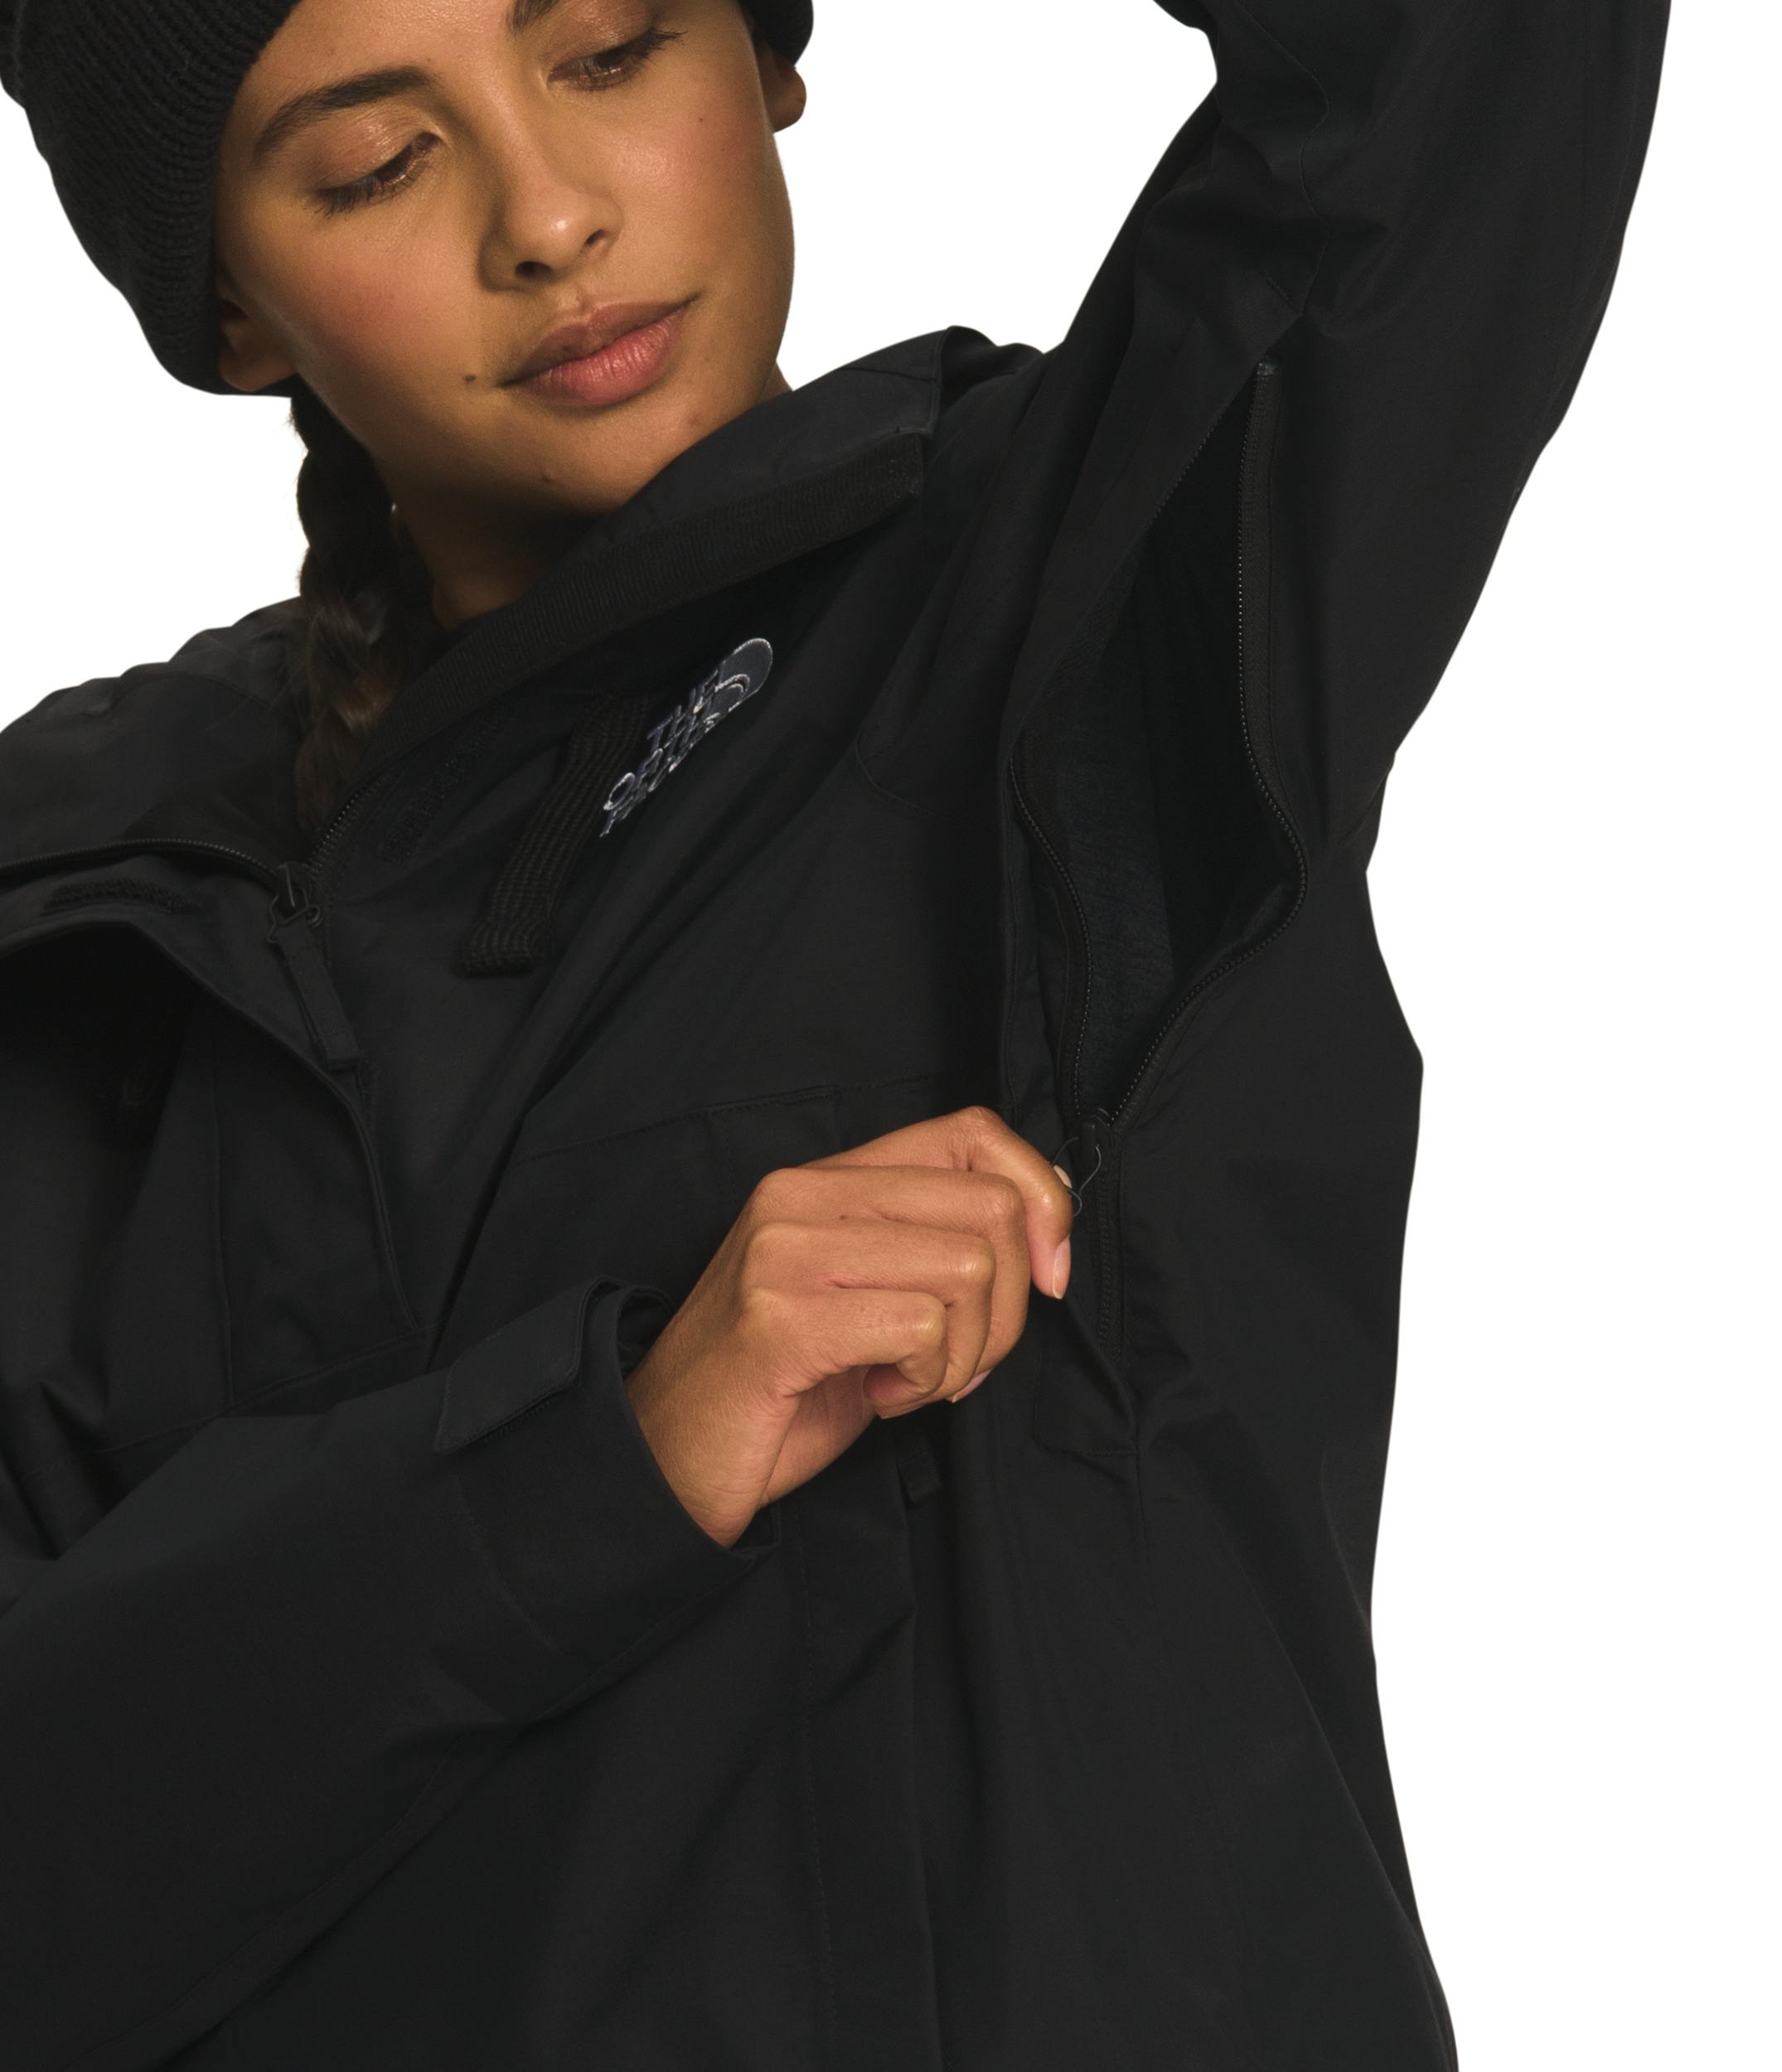 The North Face Women's Tanager 2L Jacket